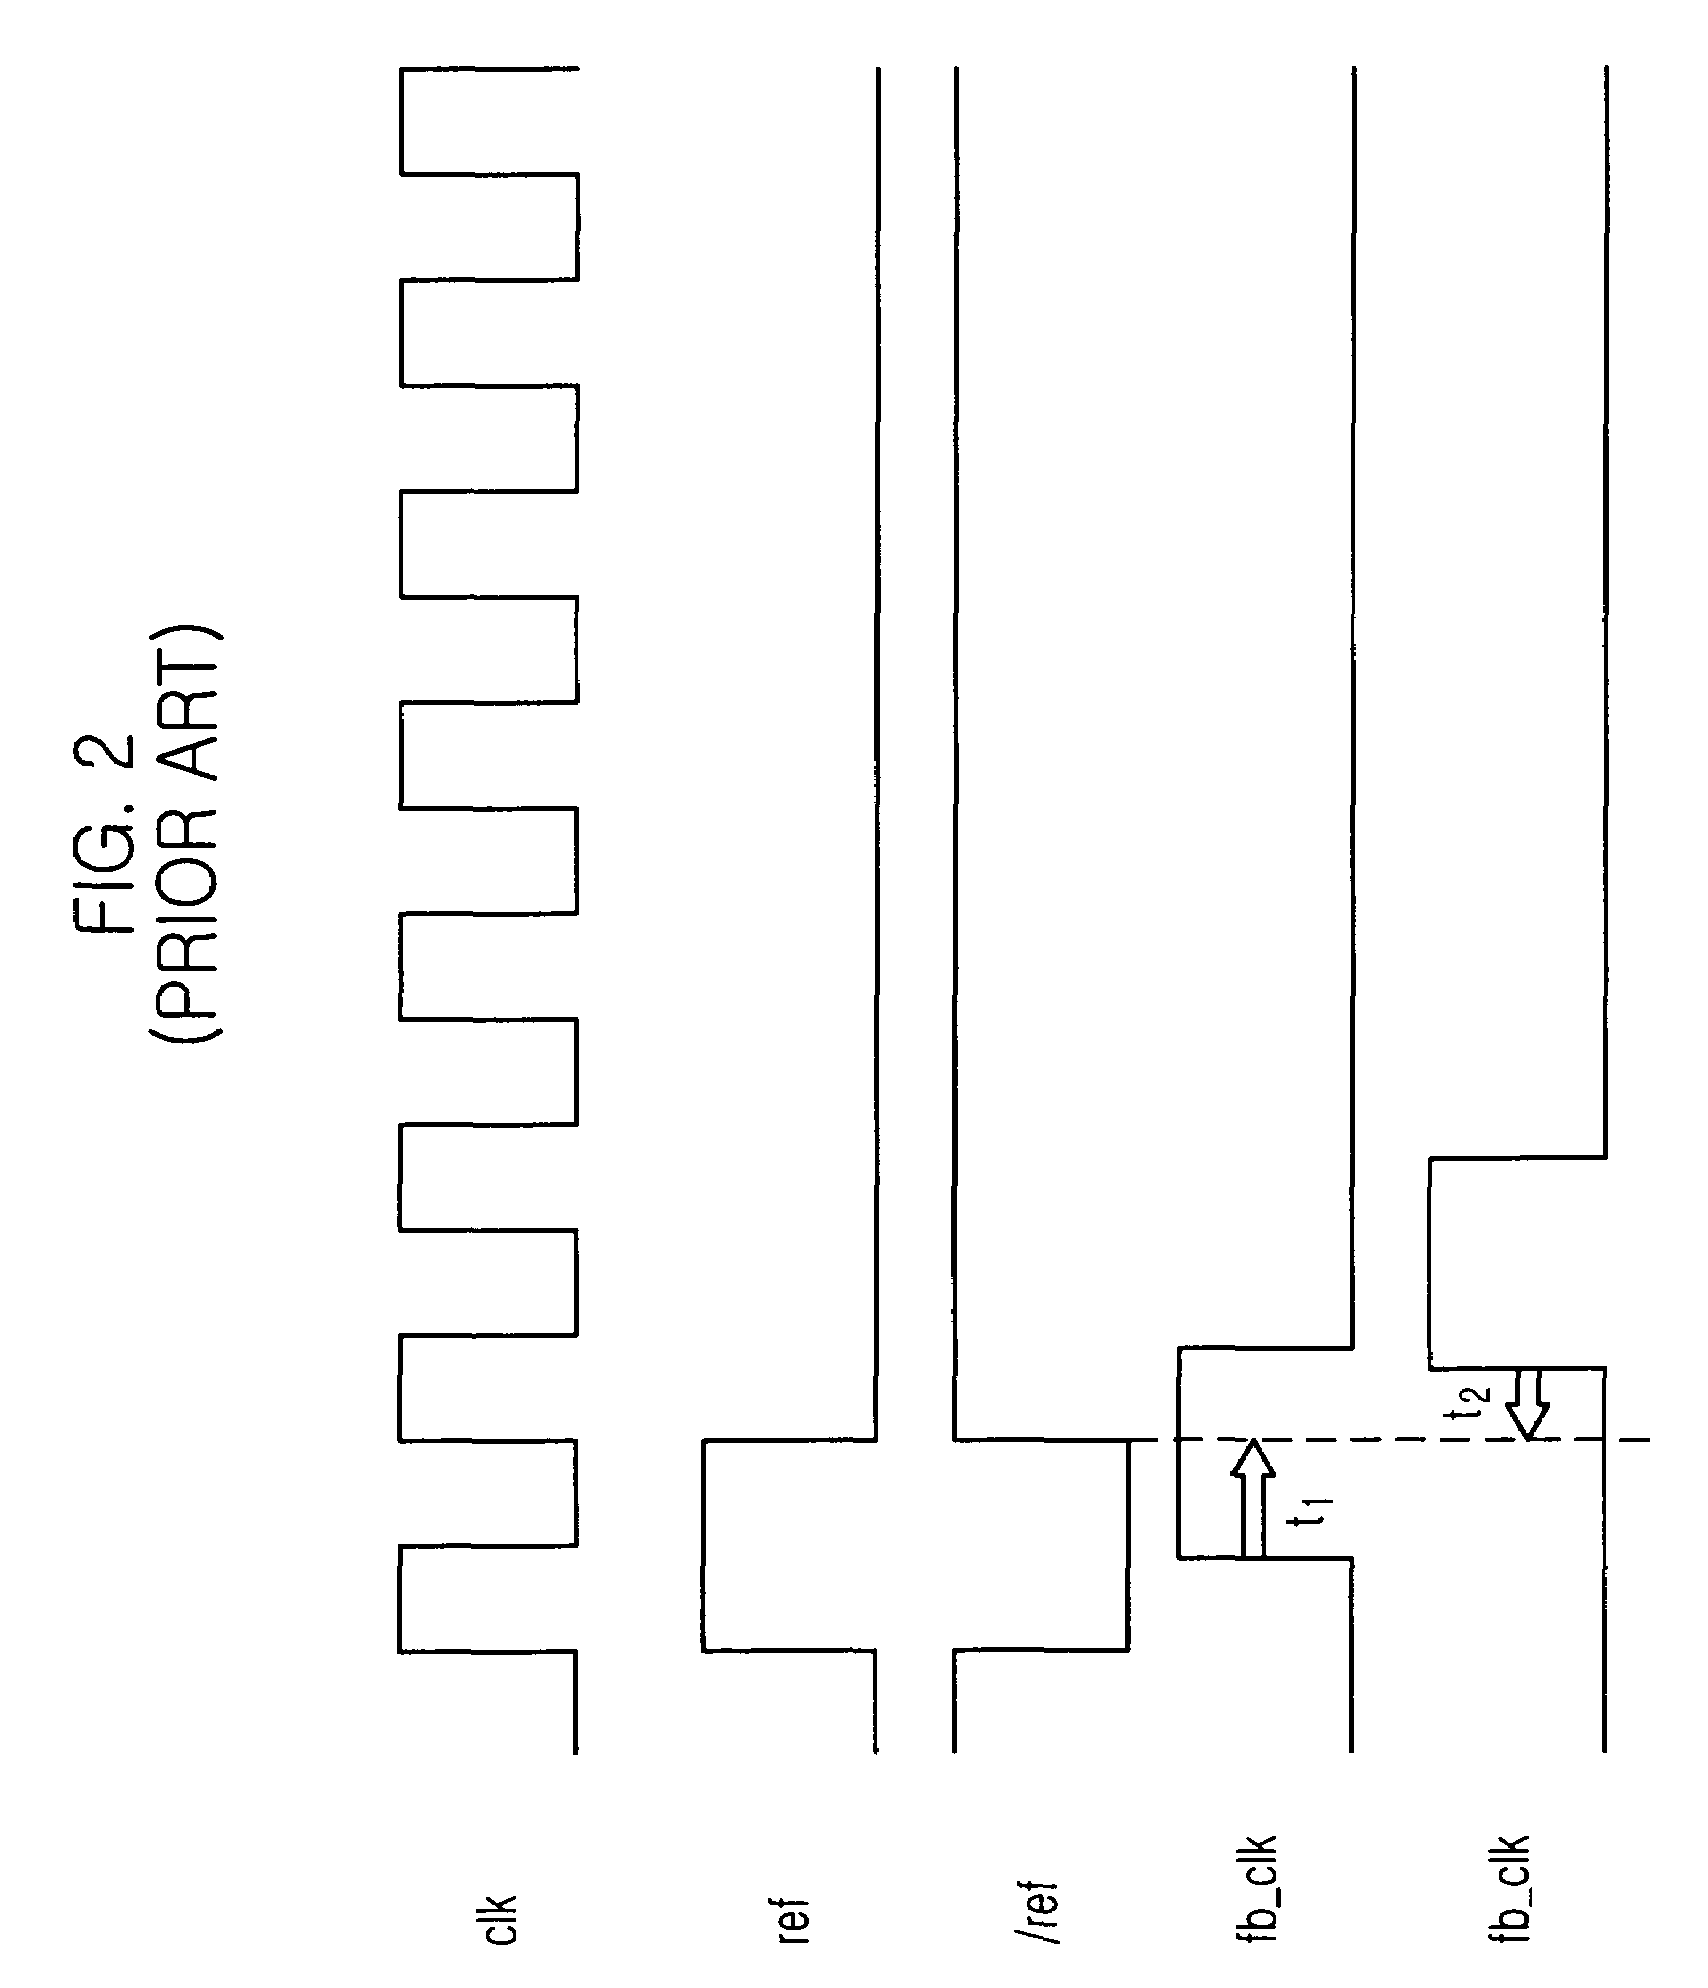 Delay locked loop in semiconductor memory device and its clock locking method